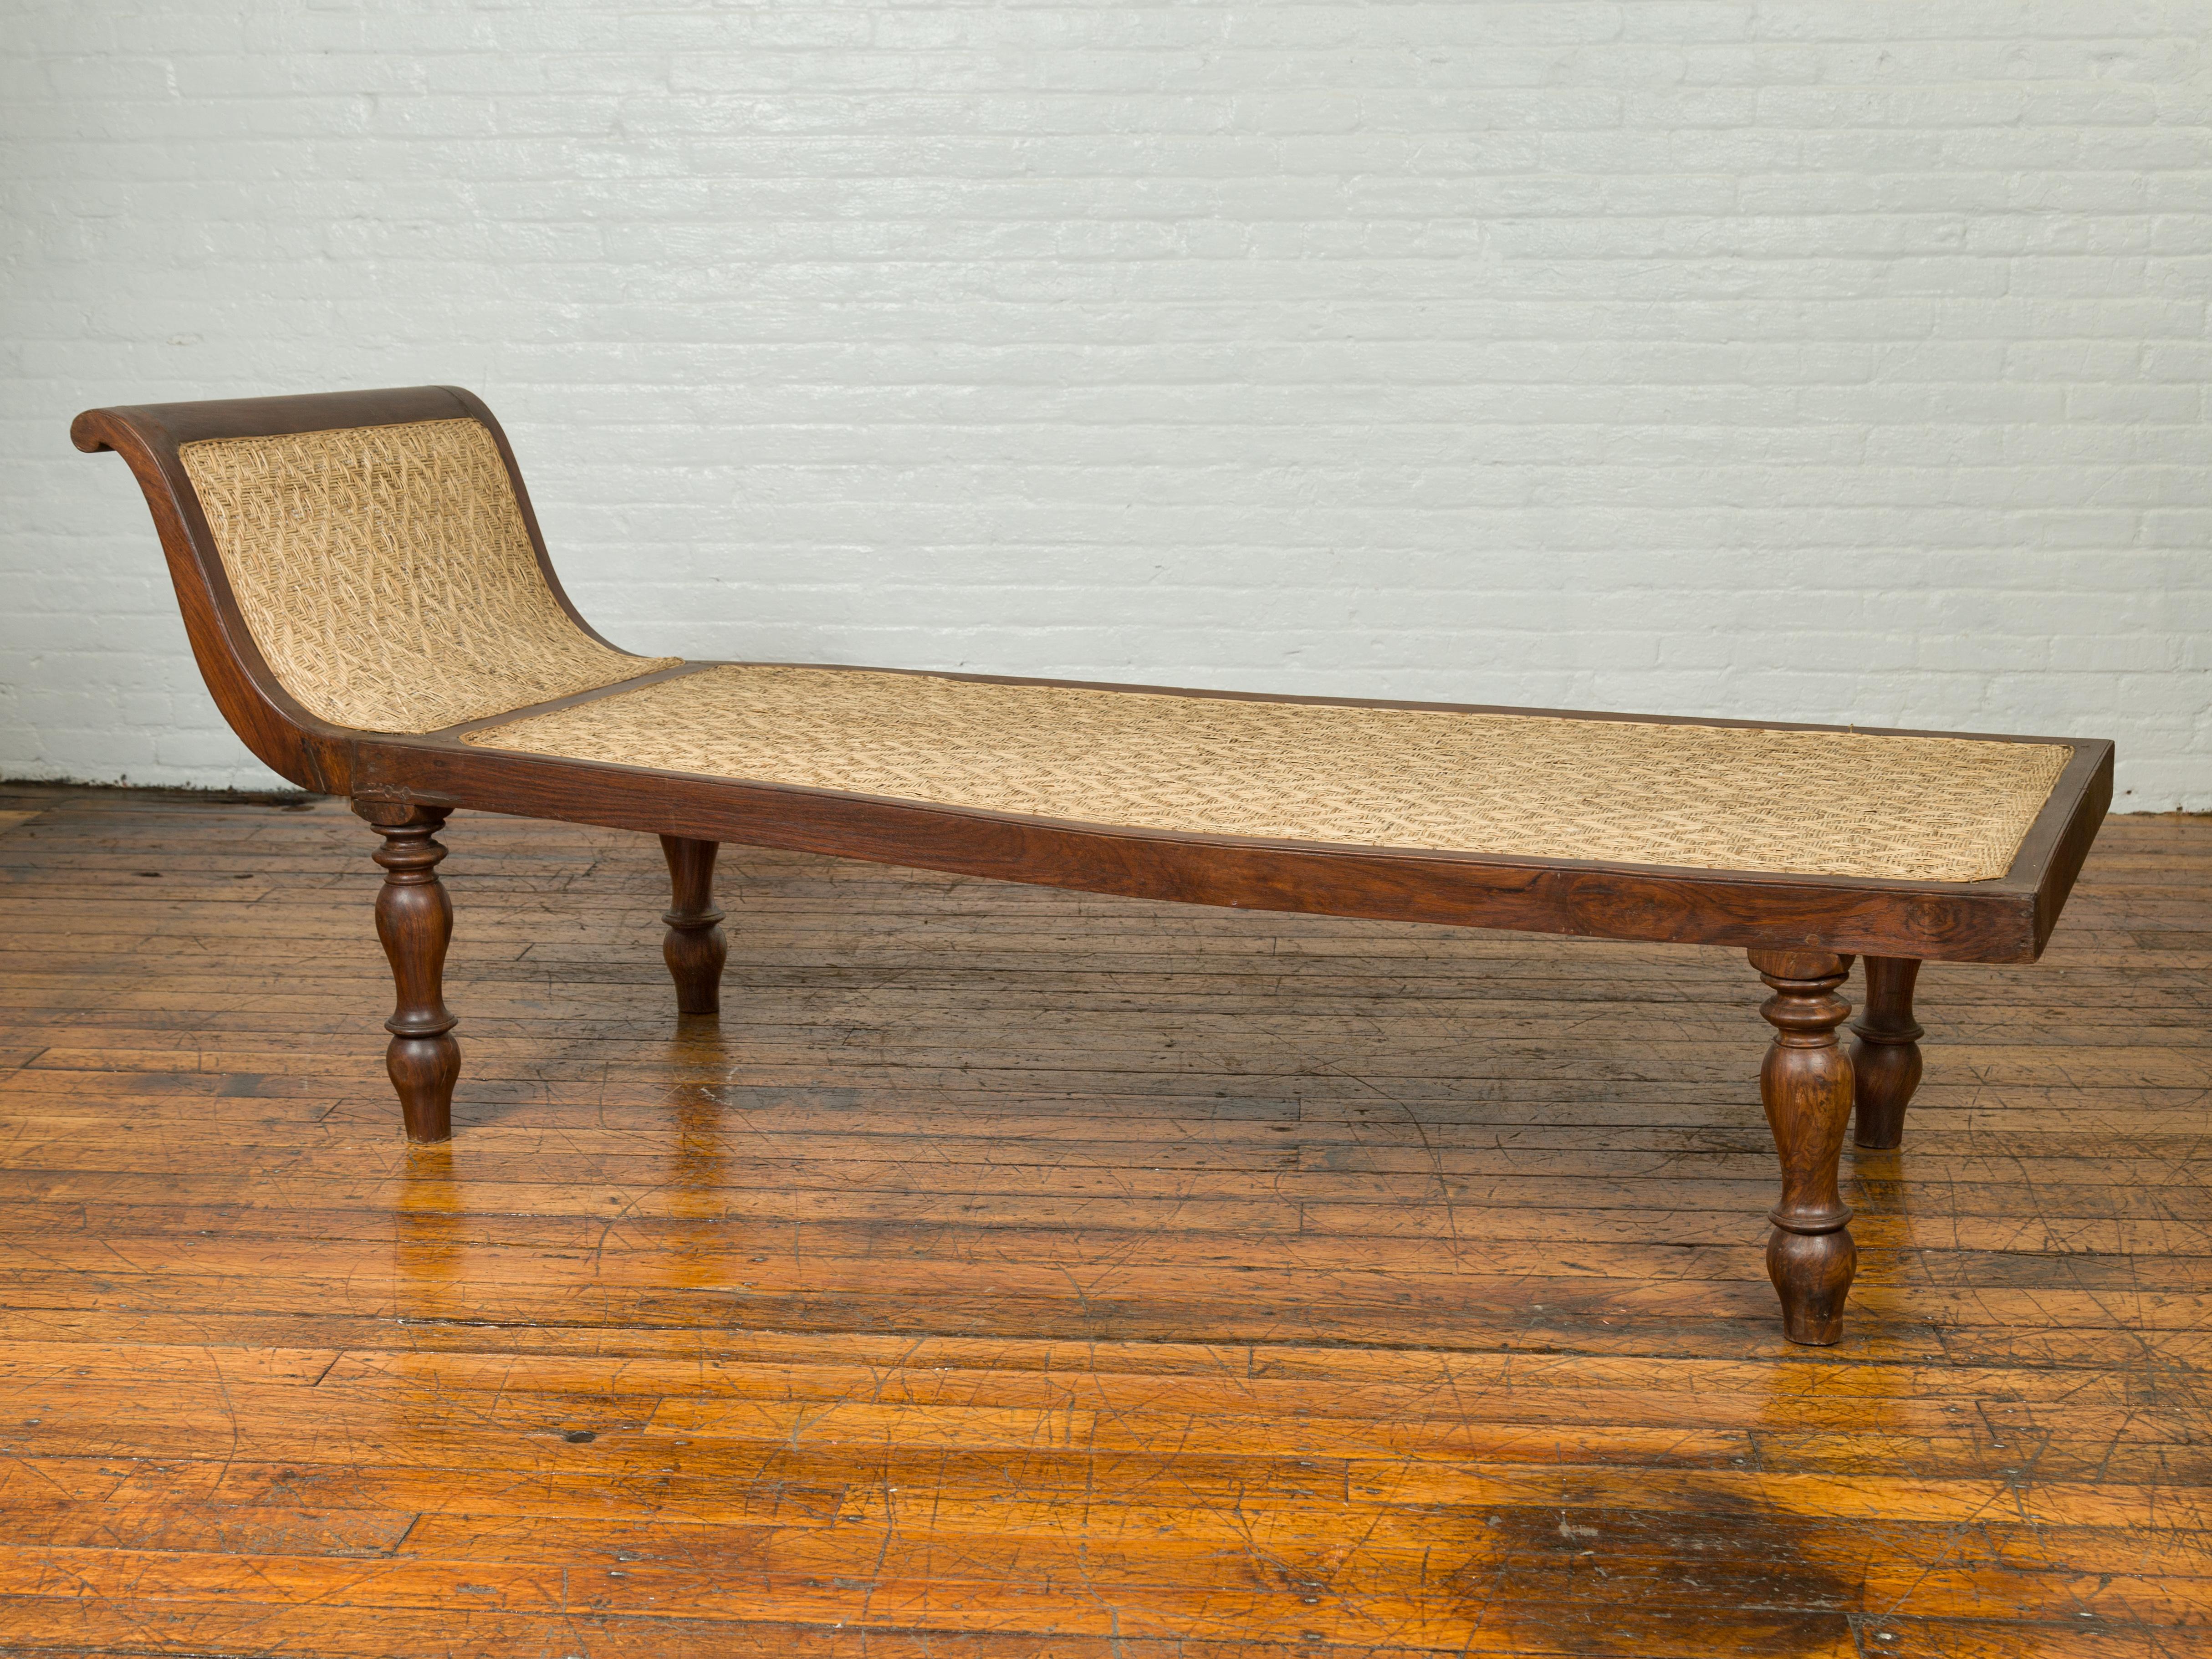 Dutch Colonial Late 19th Century Teak Wood and Rattan Daybed with Turned Legs 4